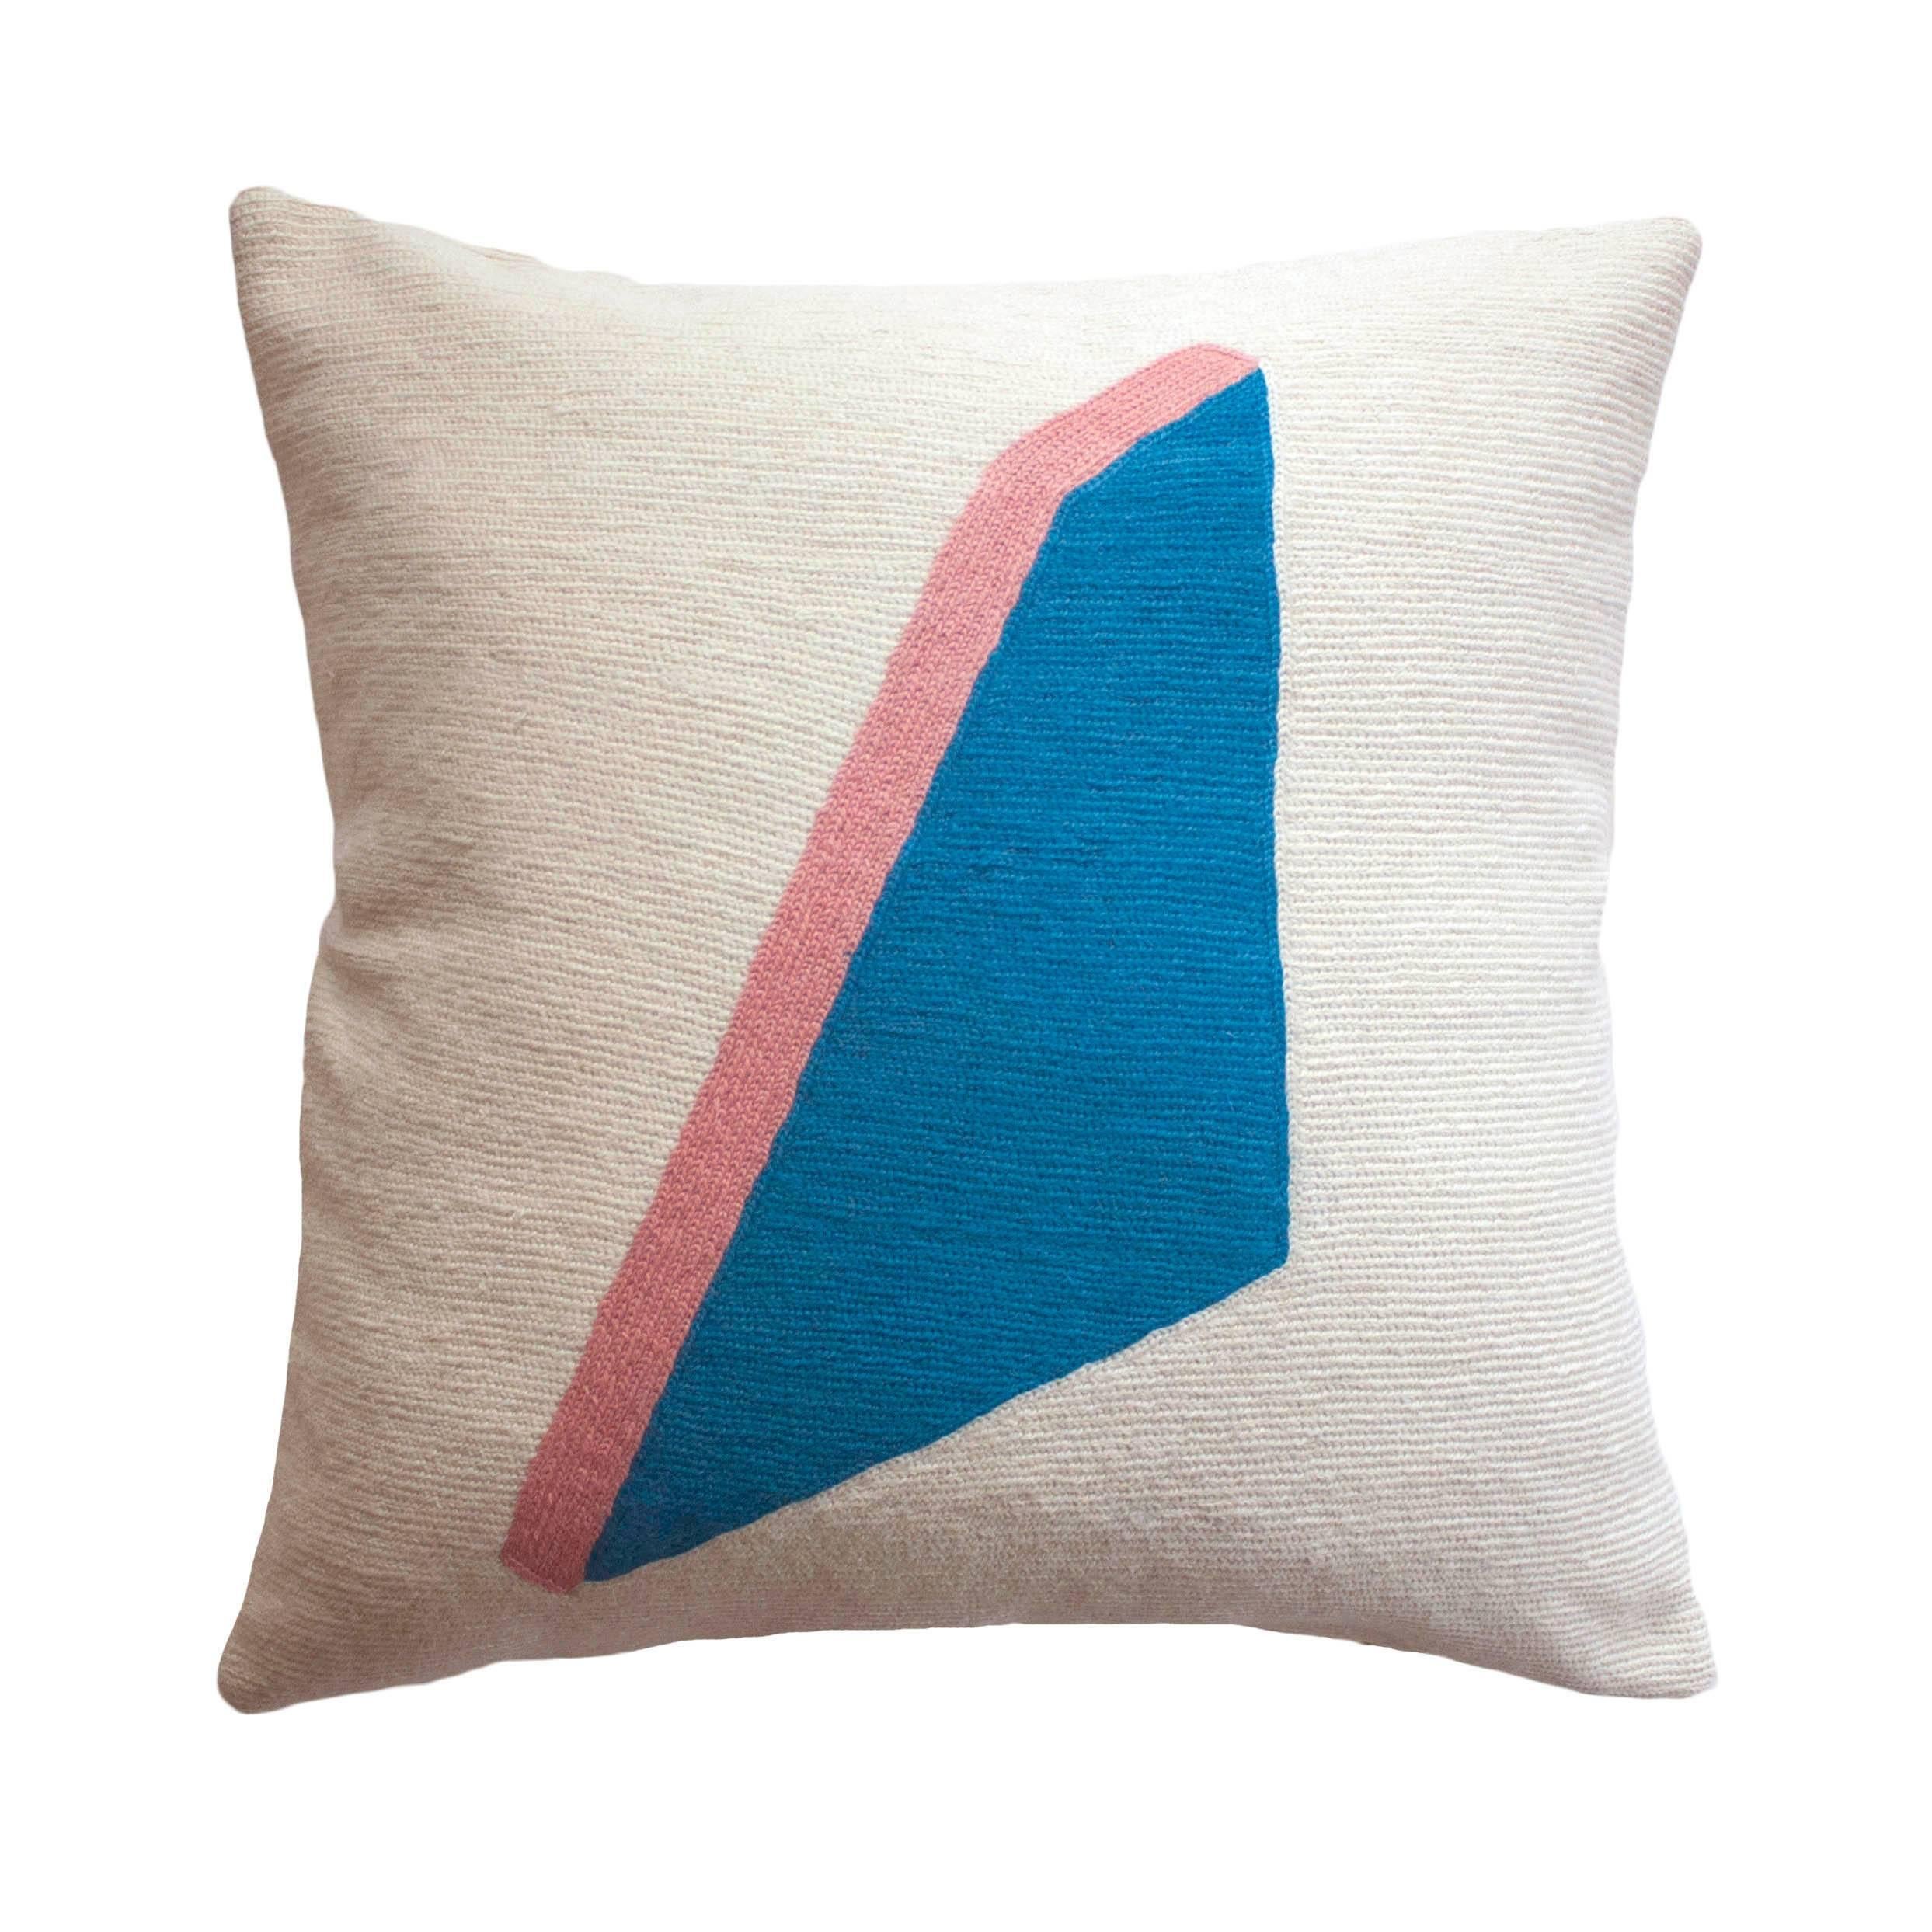 Whitney Shape Modern Hand Embroidered Geometric Throw Pillow Cover